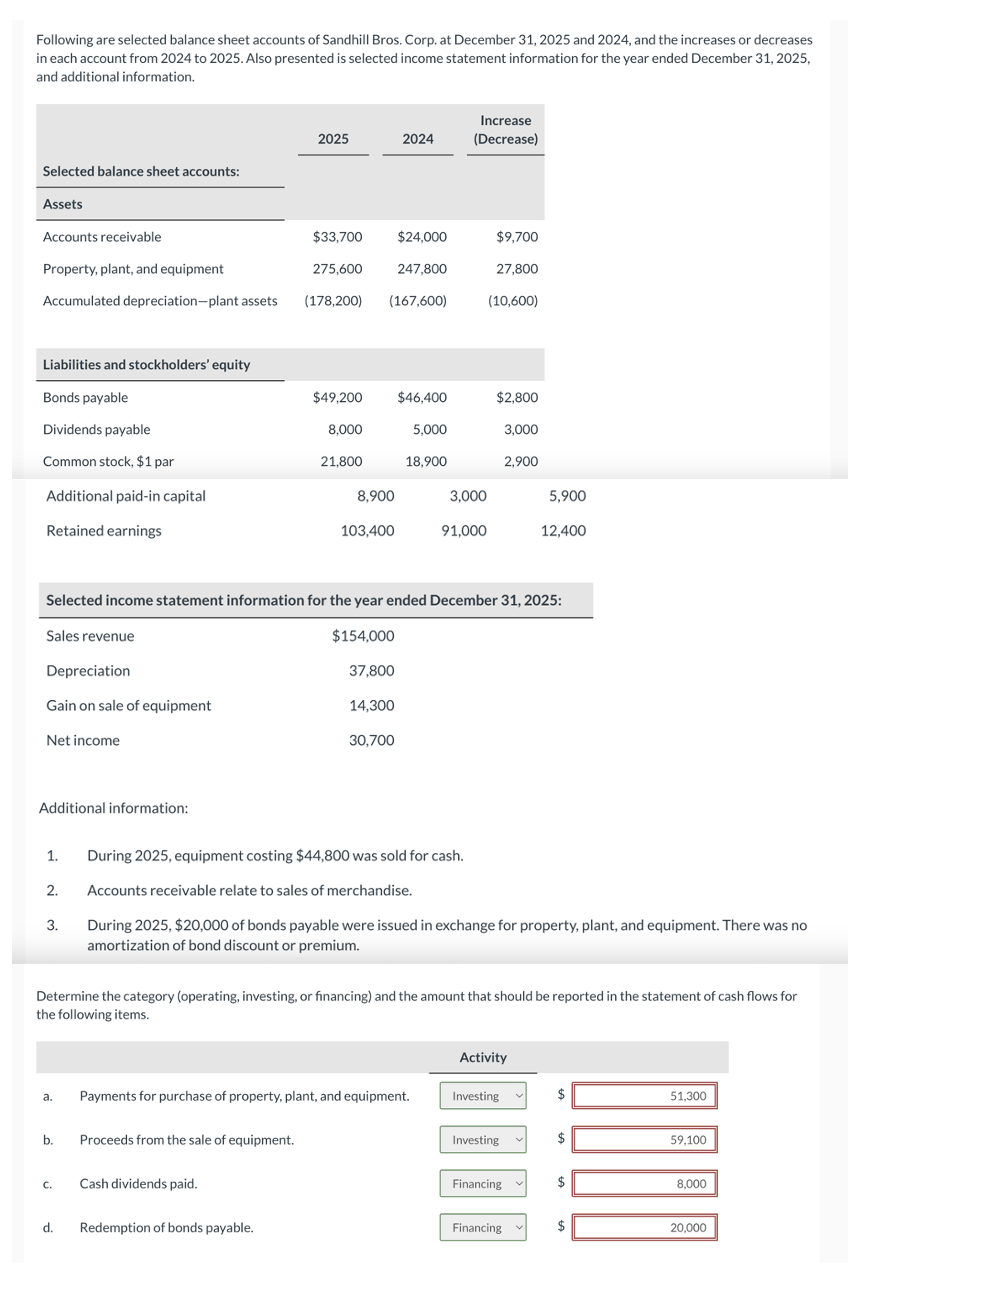 Following are selected balance sheet accounts of Sandhill Bros. Corp. at December 31, 2025 and 2024, and the increases or decreases
in each account from 2024 to 2025. Also presented is selected income statement information for the year ended December 31, 2025,
and additional information.
Selected balance sheet accounts:
2025
2024
Increase
(Decrease)
Assets
Accounts receivable
$33,700
$24,000
$9,700
Property, plant, and equipment
275,600
247,800
27,800
Accumulated depreciation-plant assets
(178,200)
(167,600)
(10,600)
Liabilities and stockholders' equity
Bonds payable
$49,200
$46,400
$2,800
Dividends payable
8,000
5,000
3,000
Common stock, $1 par
21,800
18,900
2,900
Additional paid-in capital
8,900
3,000
5,900
Retained earnings
103,400
91,000
12,400
Selected income statement information for the year ended December 31, 2025:
Sales revenue
$154,000
Depreciation
37,800
Gain on sale of equipment
14,300
Net income
30,700
Additional information:
1.
During 2025, equipment costing $44,800 was sold for cash.
2.
Accounts receivable relate to sales of merchandise.
3.
During 2025, $20,000 of bonds payable were issued in exchange for property, plant, and equipment. There was no
amortization of bond discount or premium.
Determine the category (operating, investing, or financing) and the amount that should be reported in the statement of cash flows for
the following items.
Activity
a.
Payments for purchase of property, plant, and equipment.
Investing
b.
Proceeds from the sale of equipment.
Investing
C.
Cash dividends paid.
Financing
d. Redemption of bonds payable.
Financing
51,300
59.100
8,000
20,000
GOOD